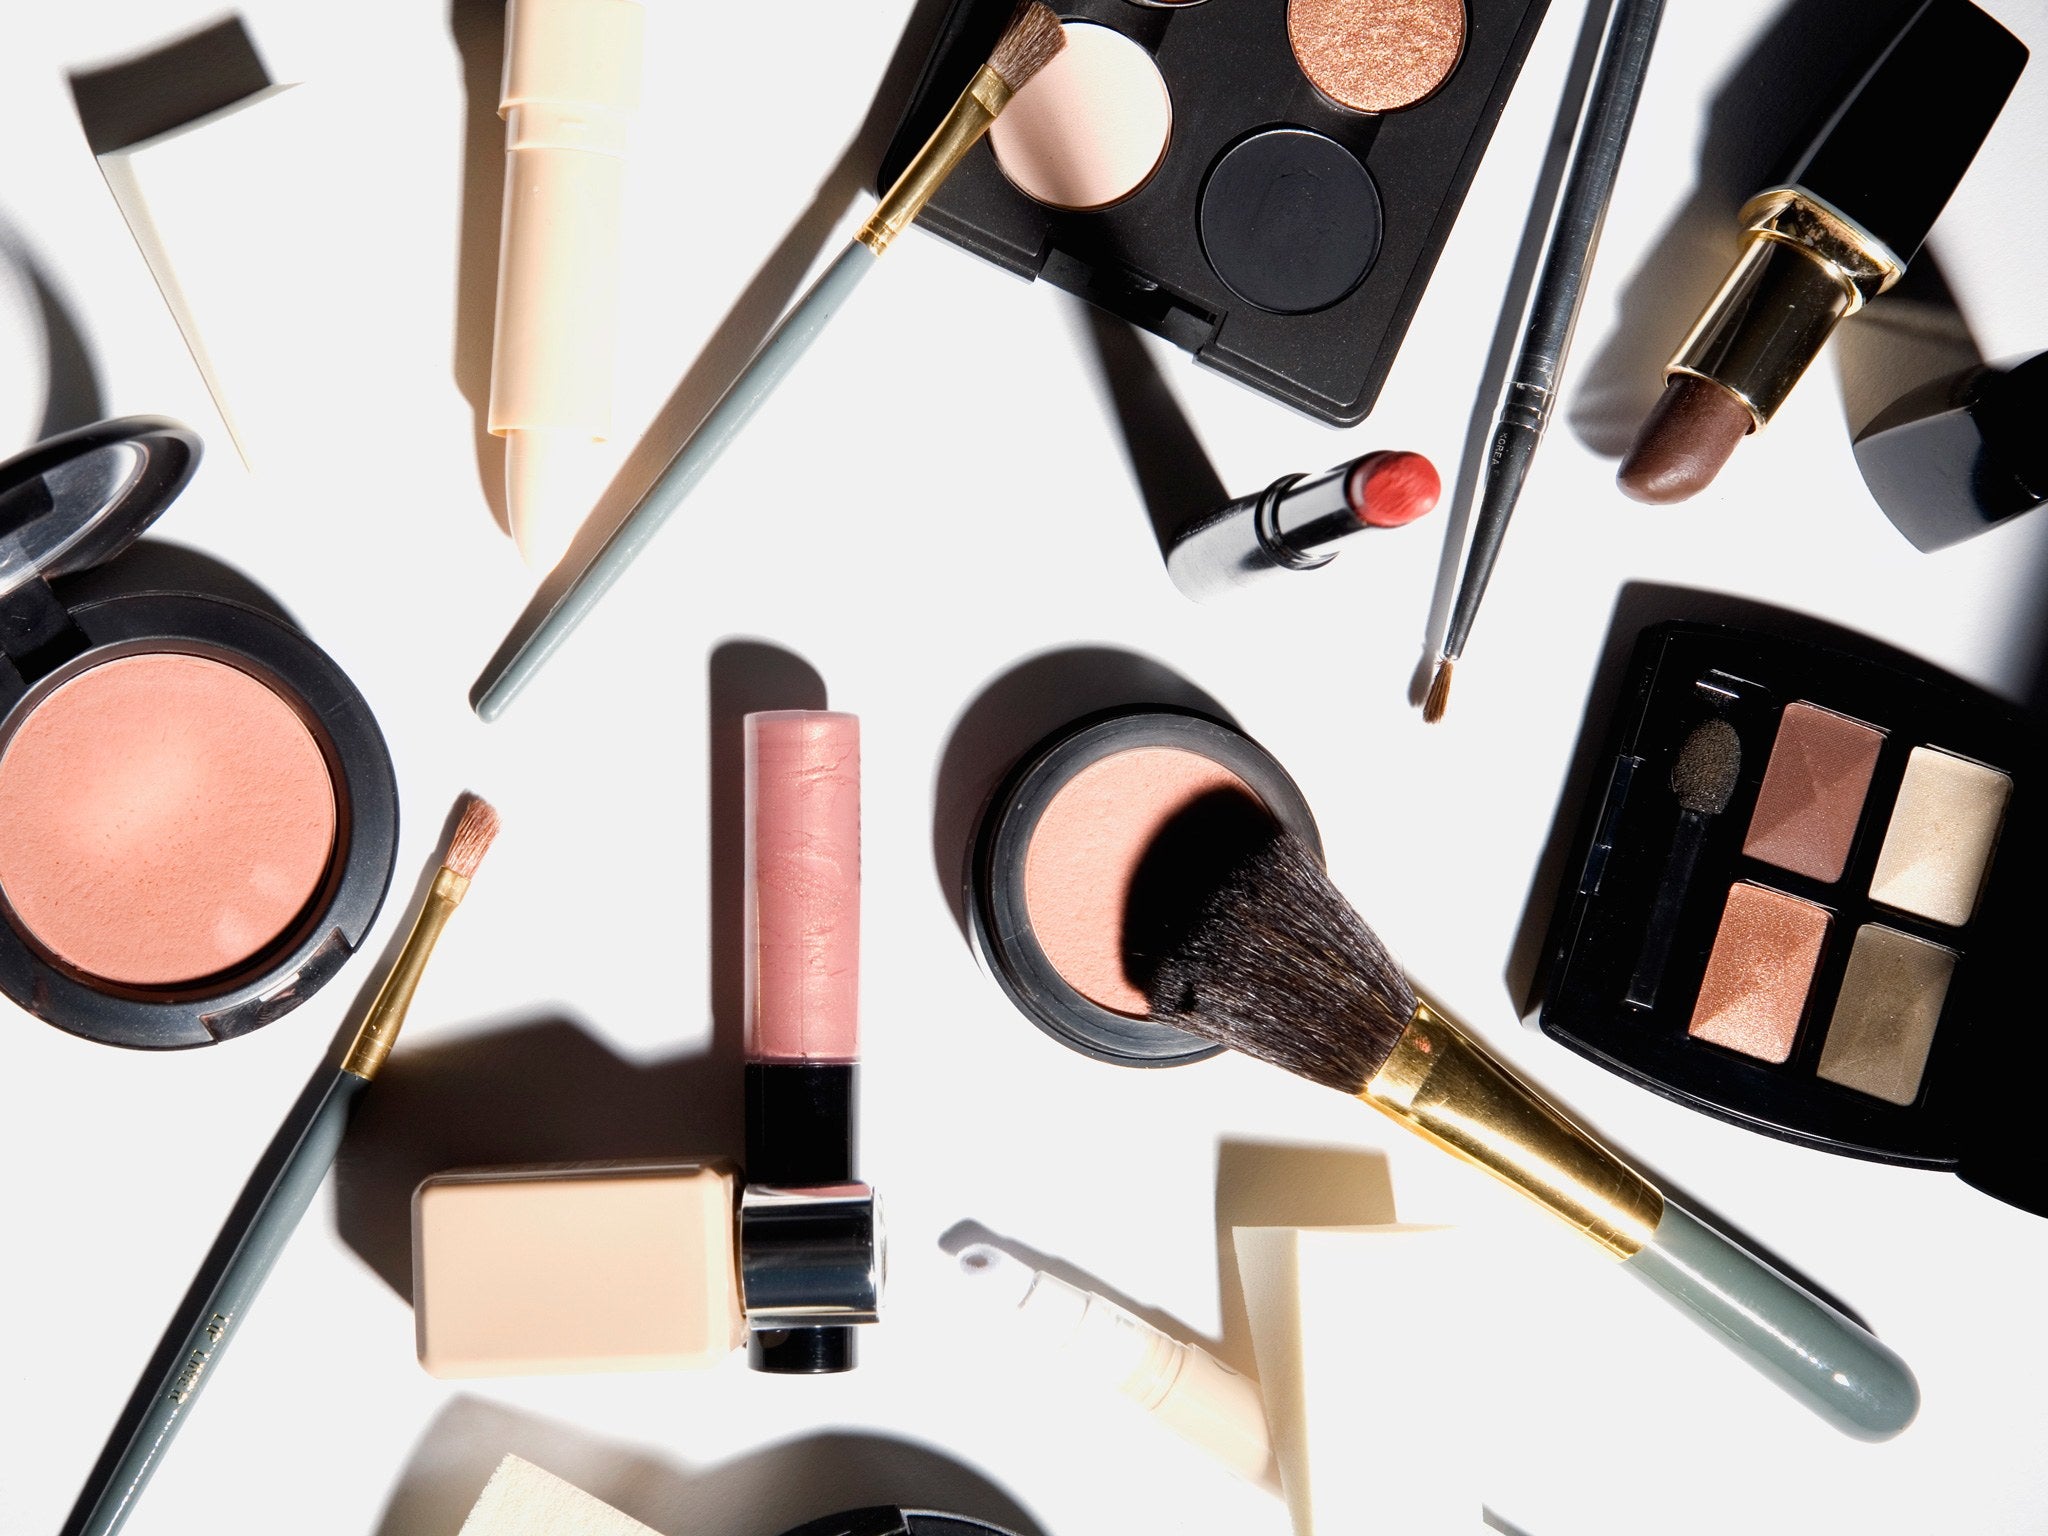 Top Tips to Save on Amazing Make-Up Looks